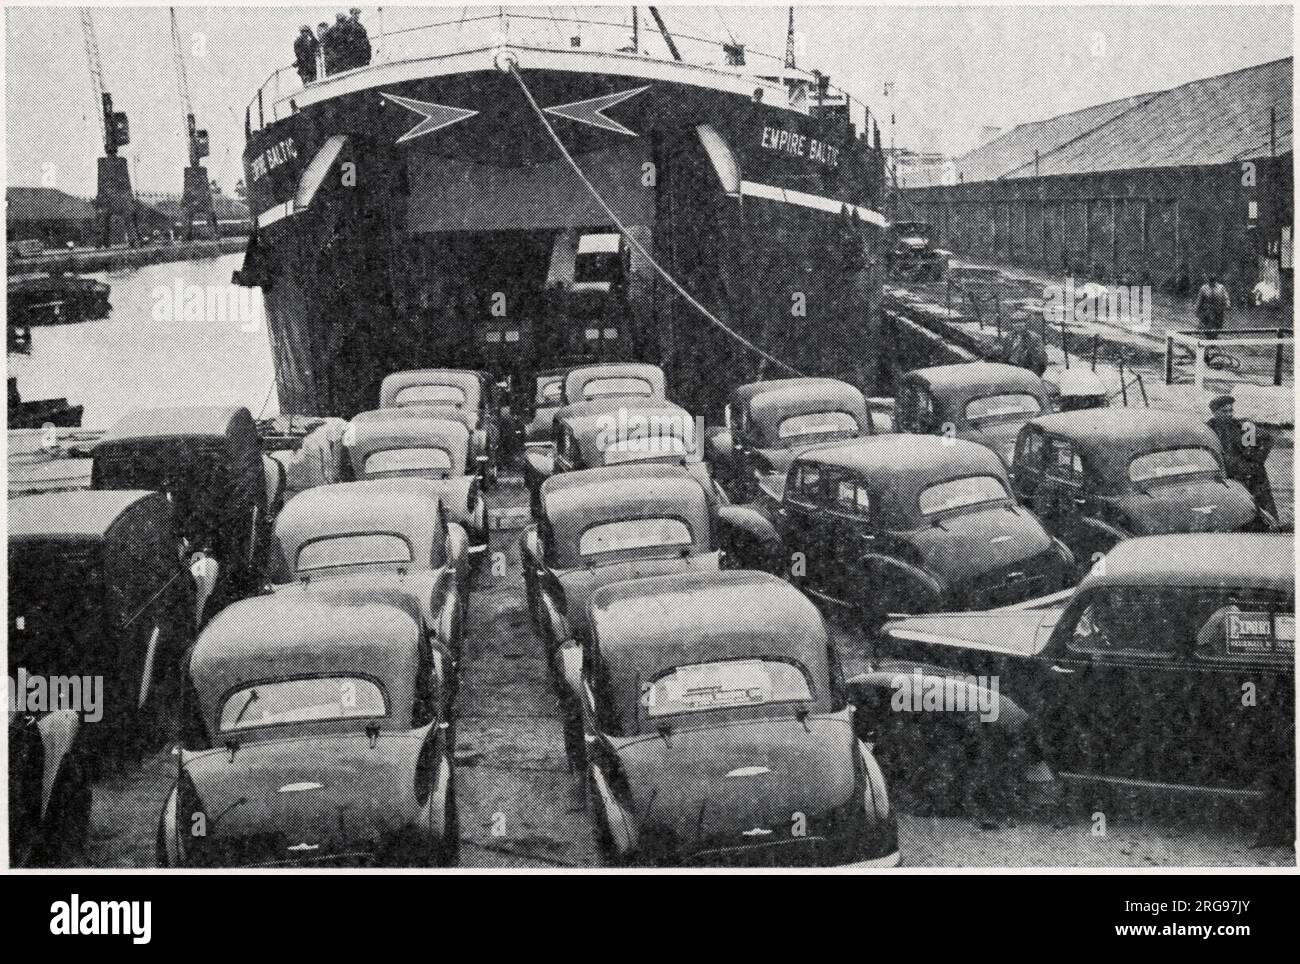 Post-WW2 export trade of cars from the UK to the European mainland, using a former wartime tank landing craft. Stock Photo